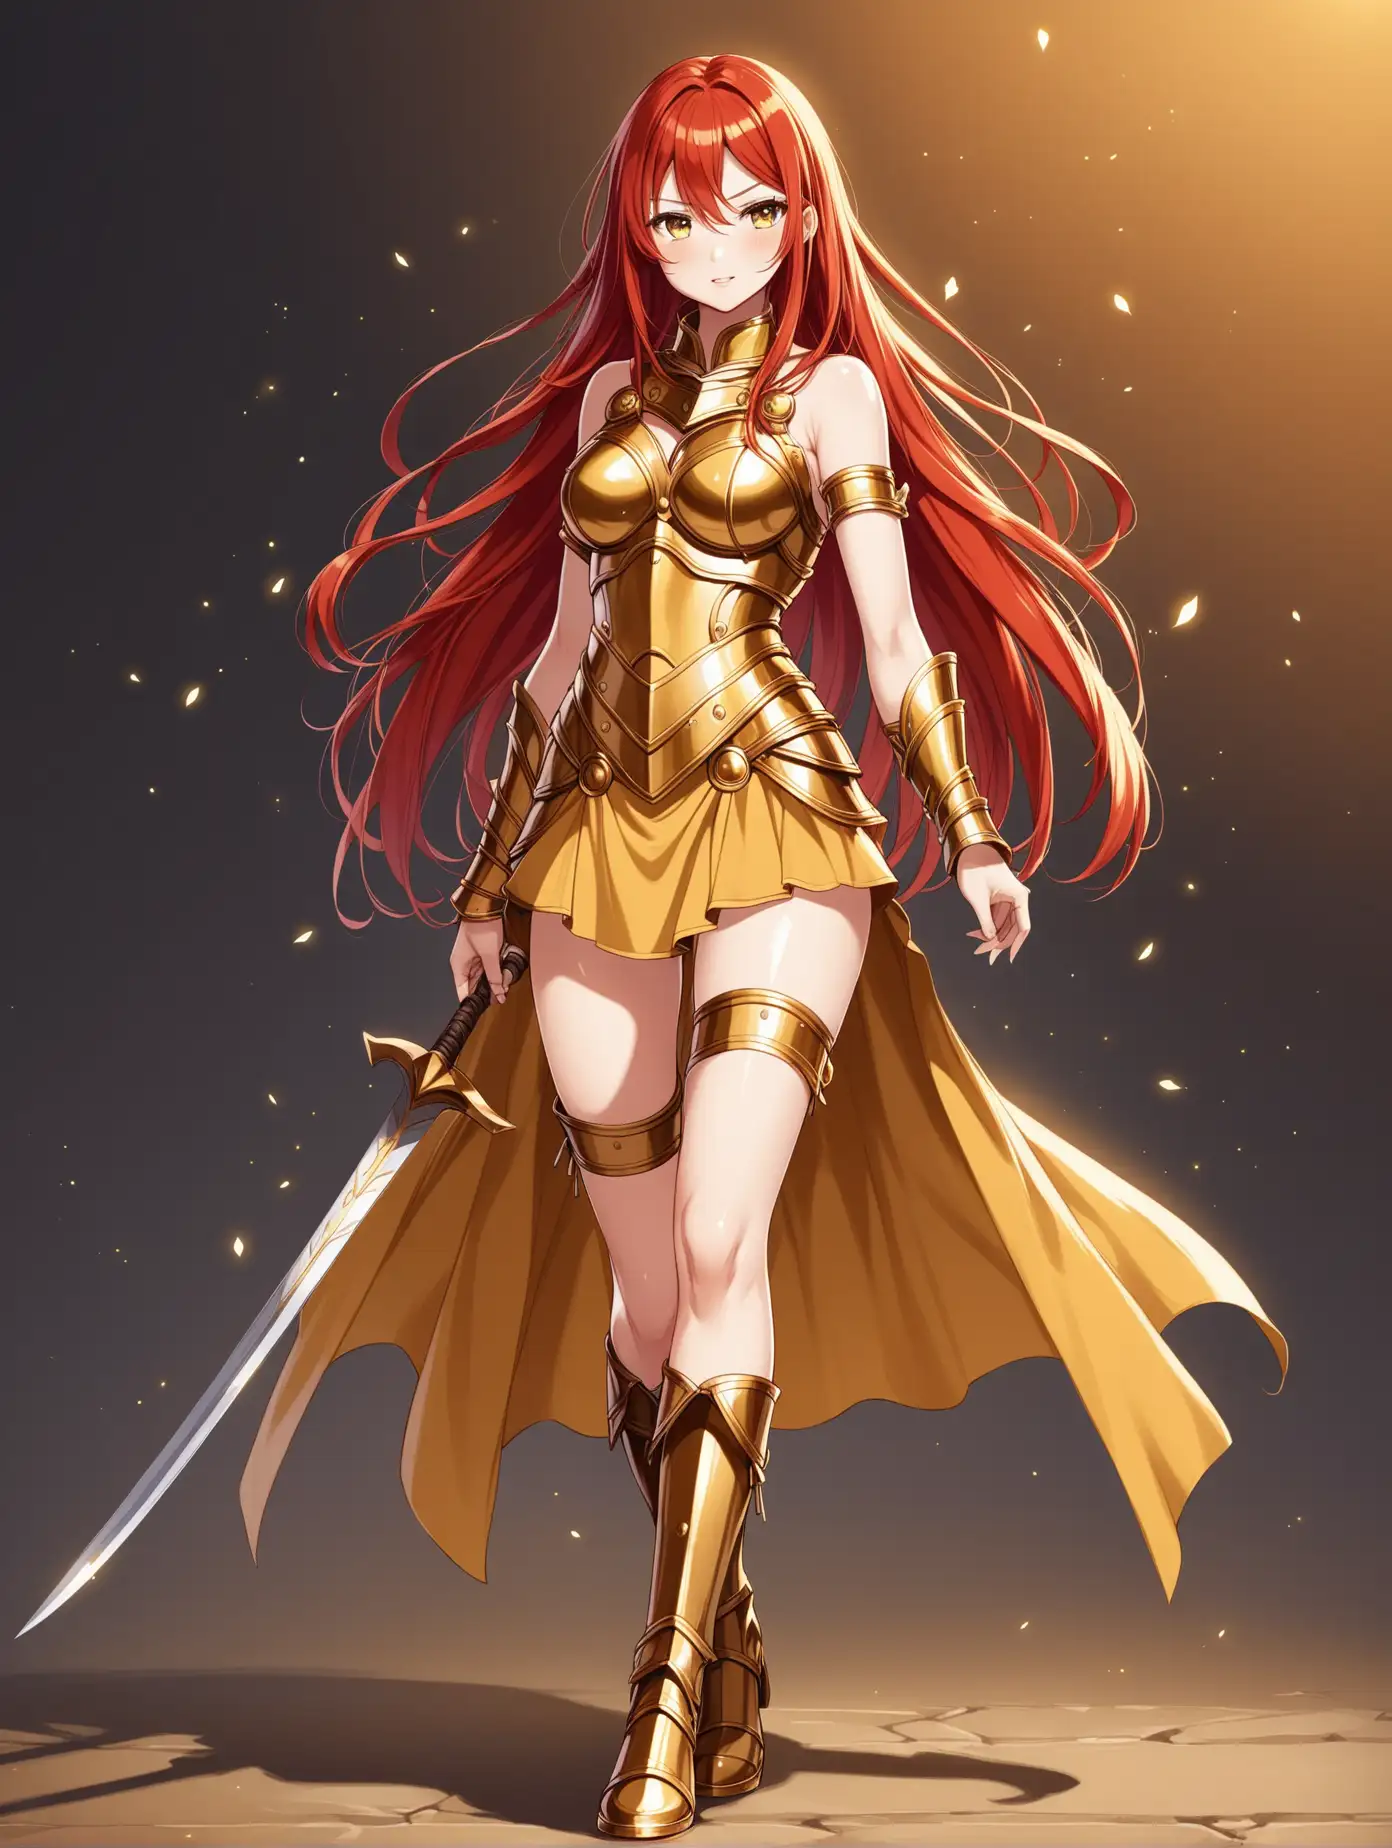 Sensual-Redhead-Anime-Gladiator-Girl-in-Golden-Attire-and-Boots